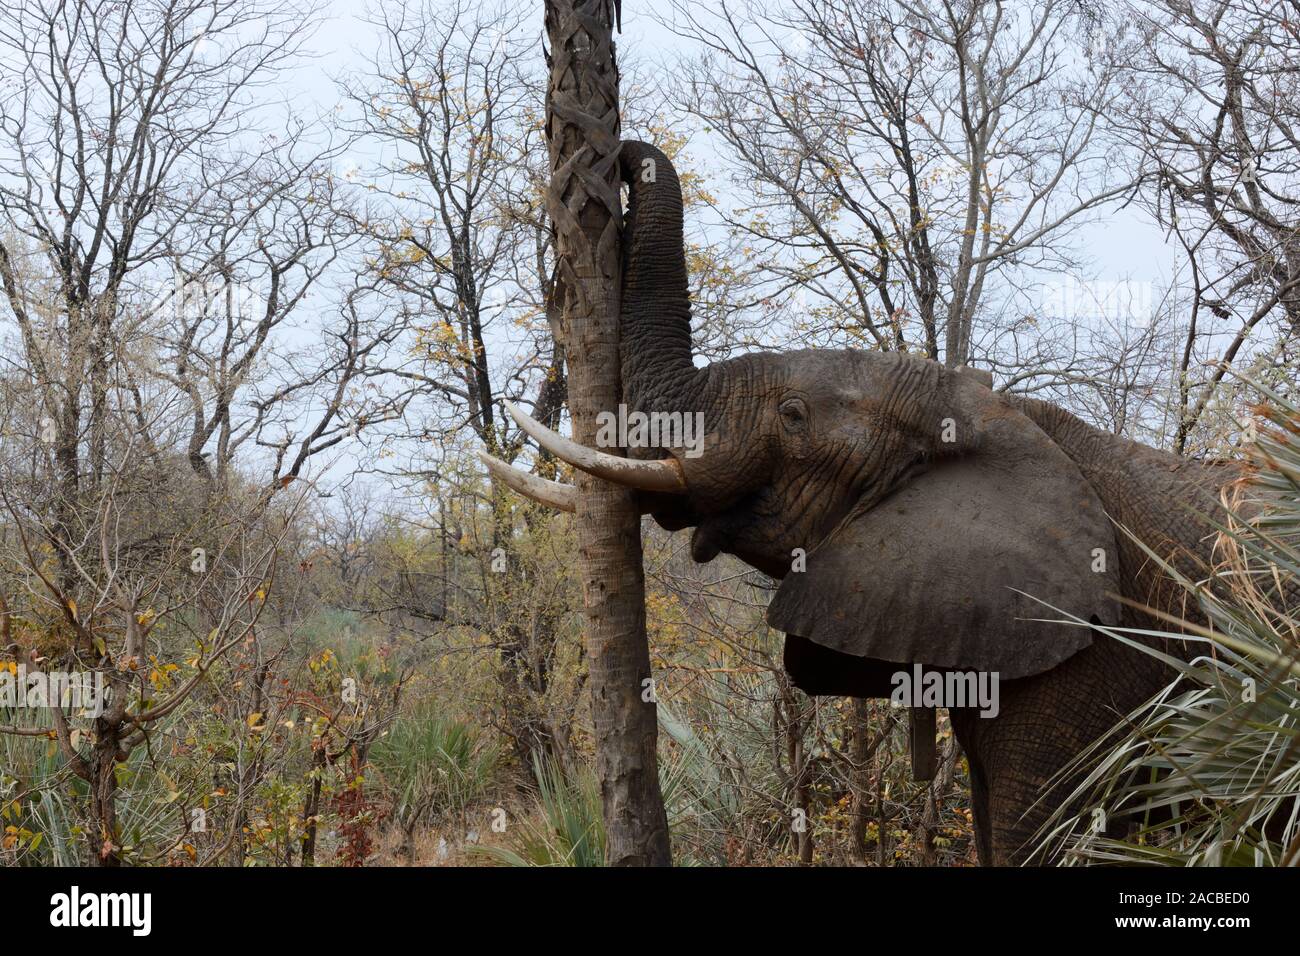 Male African elephant wearing a tracking collar shaking a tree with his trunk to find food fruit Chobe national park Botswana Africa Stock Photo